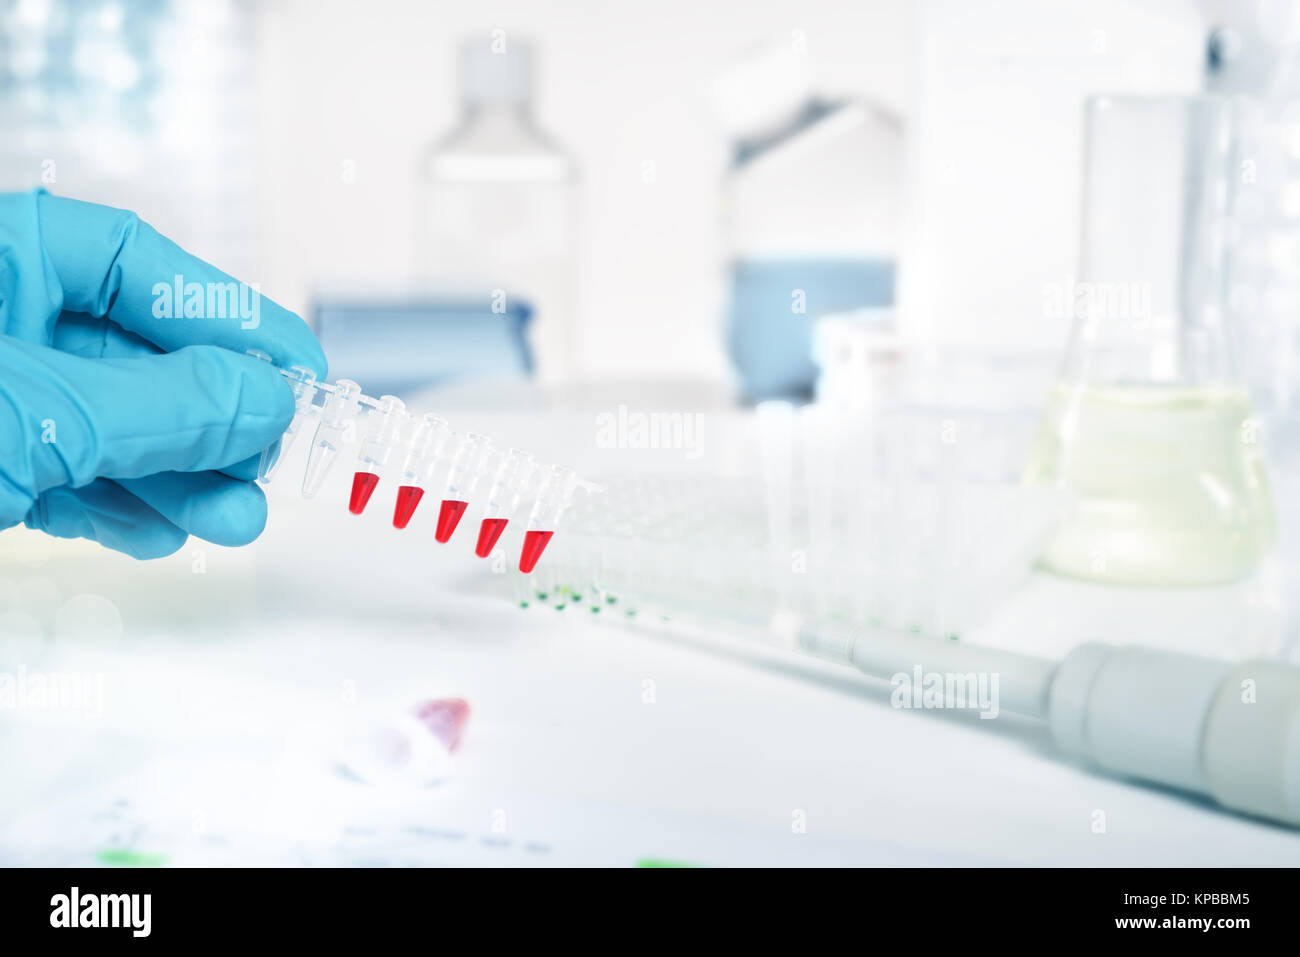 Gloved hands holds scientific sample, working table top out of focus, text space Stock Photo